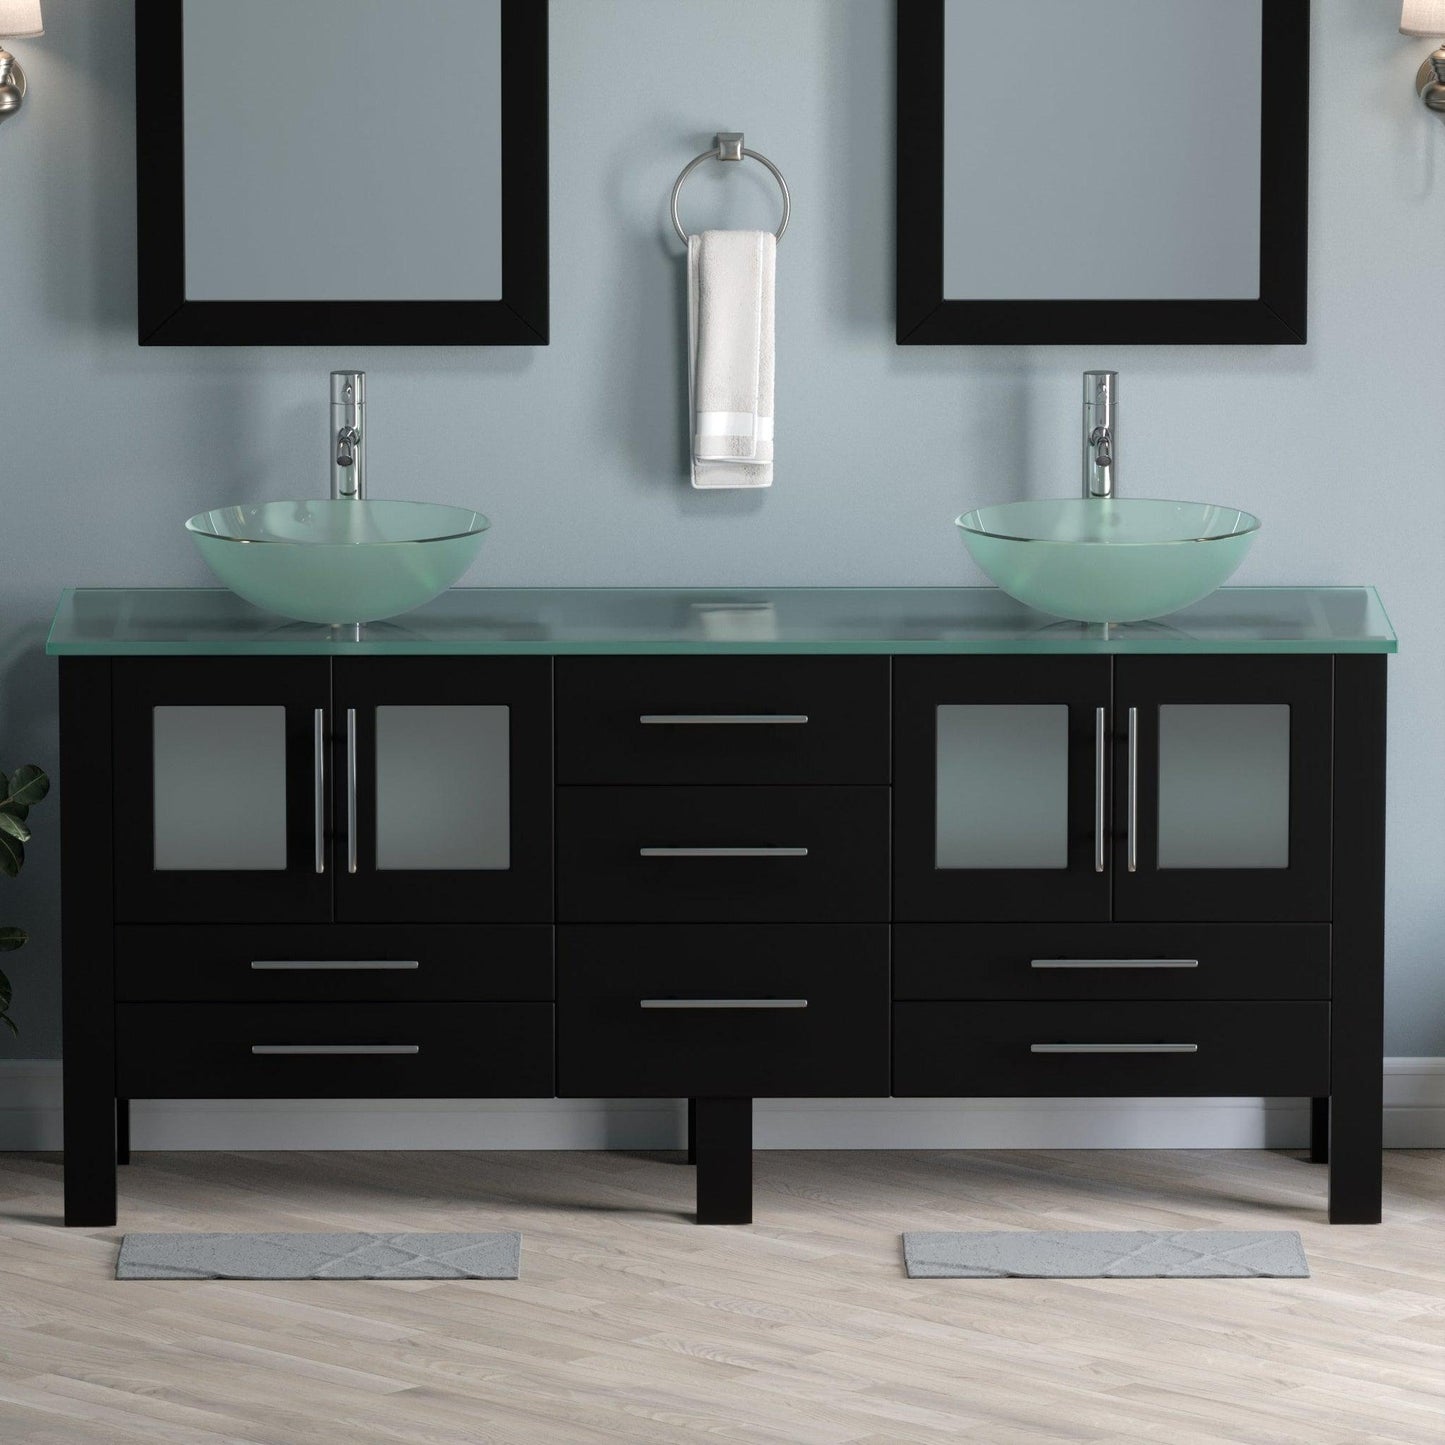 Cambridge Plumbing 72" Black Espresso Wood Double Vanity Set With Tempered Glass Countertop And Circular Vessel Sink With Polished Chrome Plumbing Finish